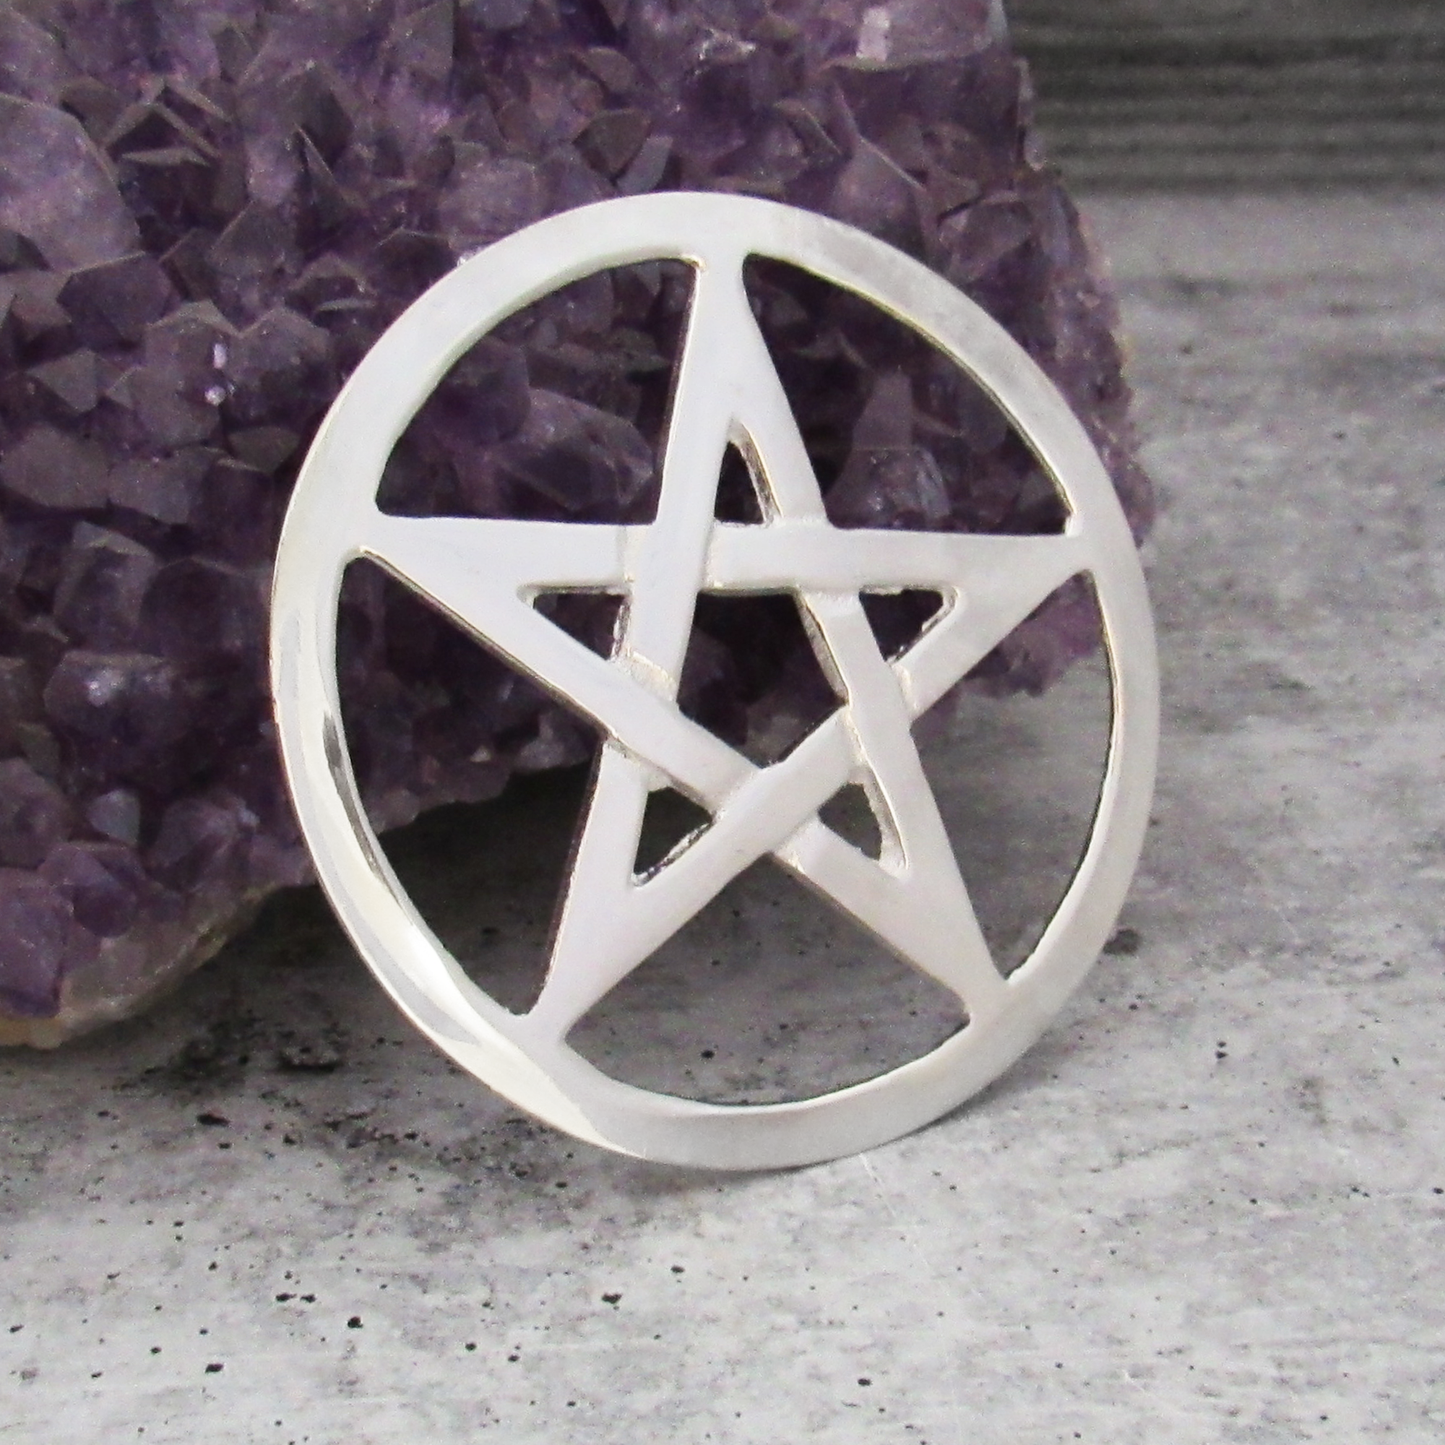 Silver-Plated Pentacle Altar Tile (2.75 Inches)